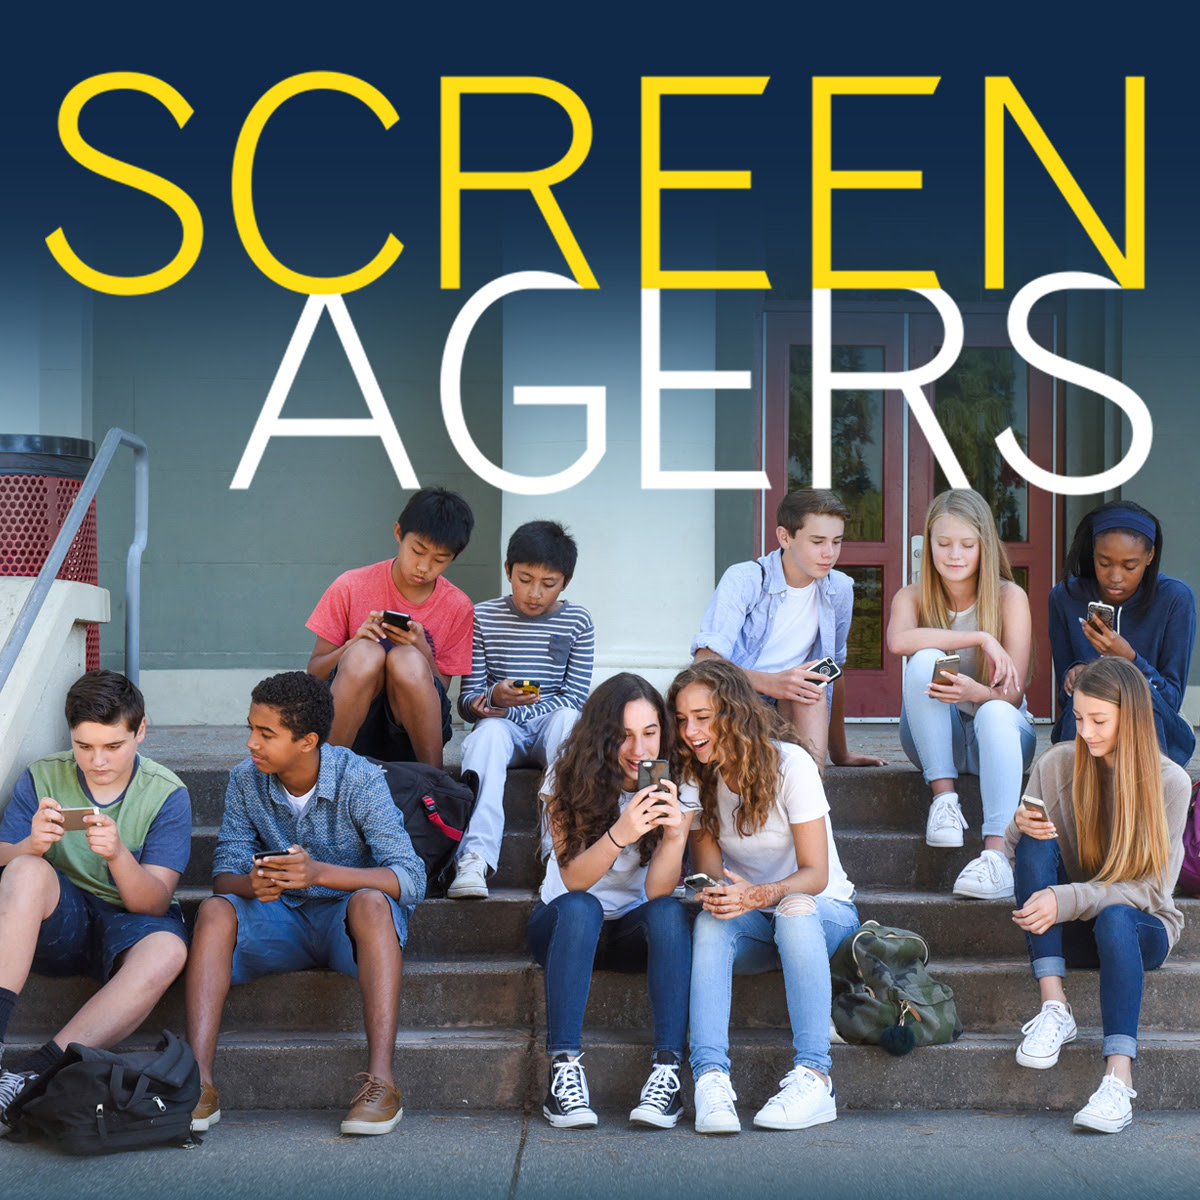 Screenagers Film Presented By Madison High School